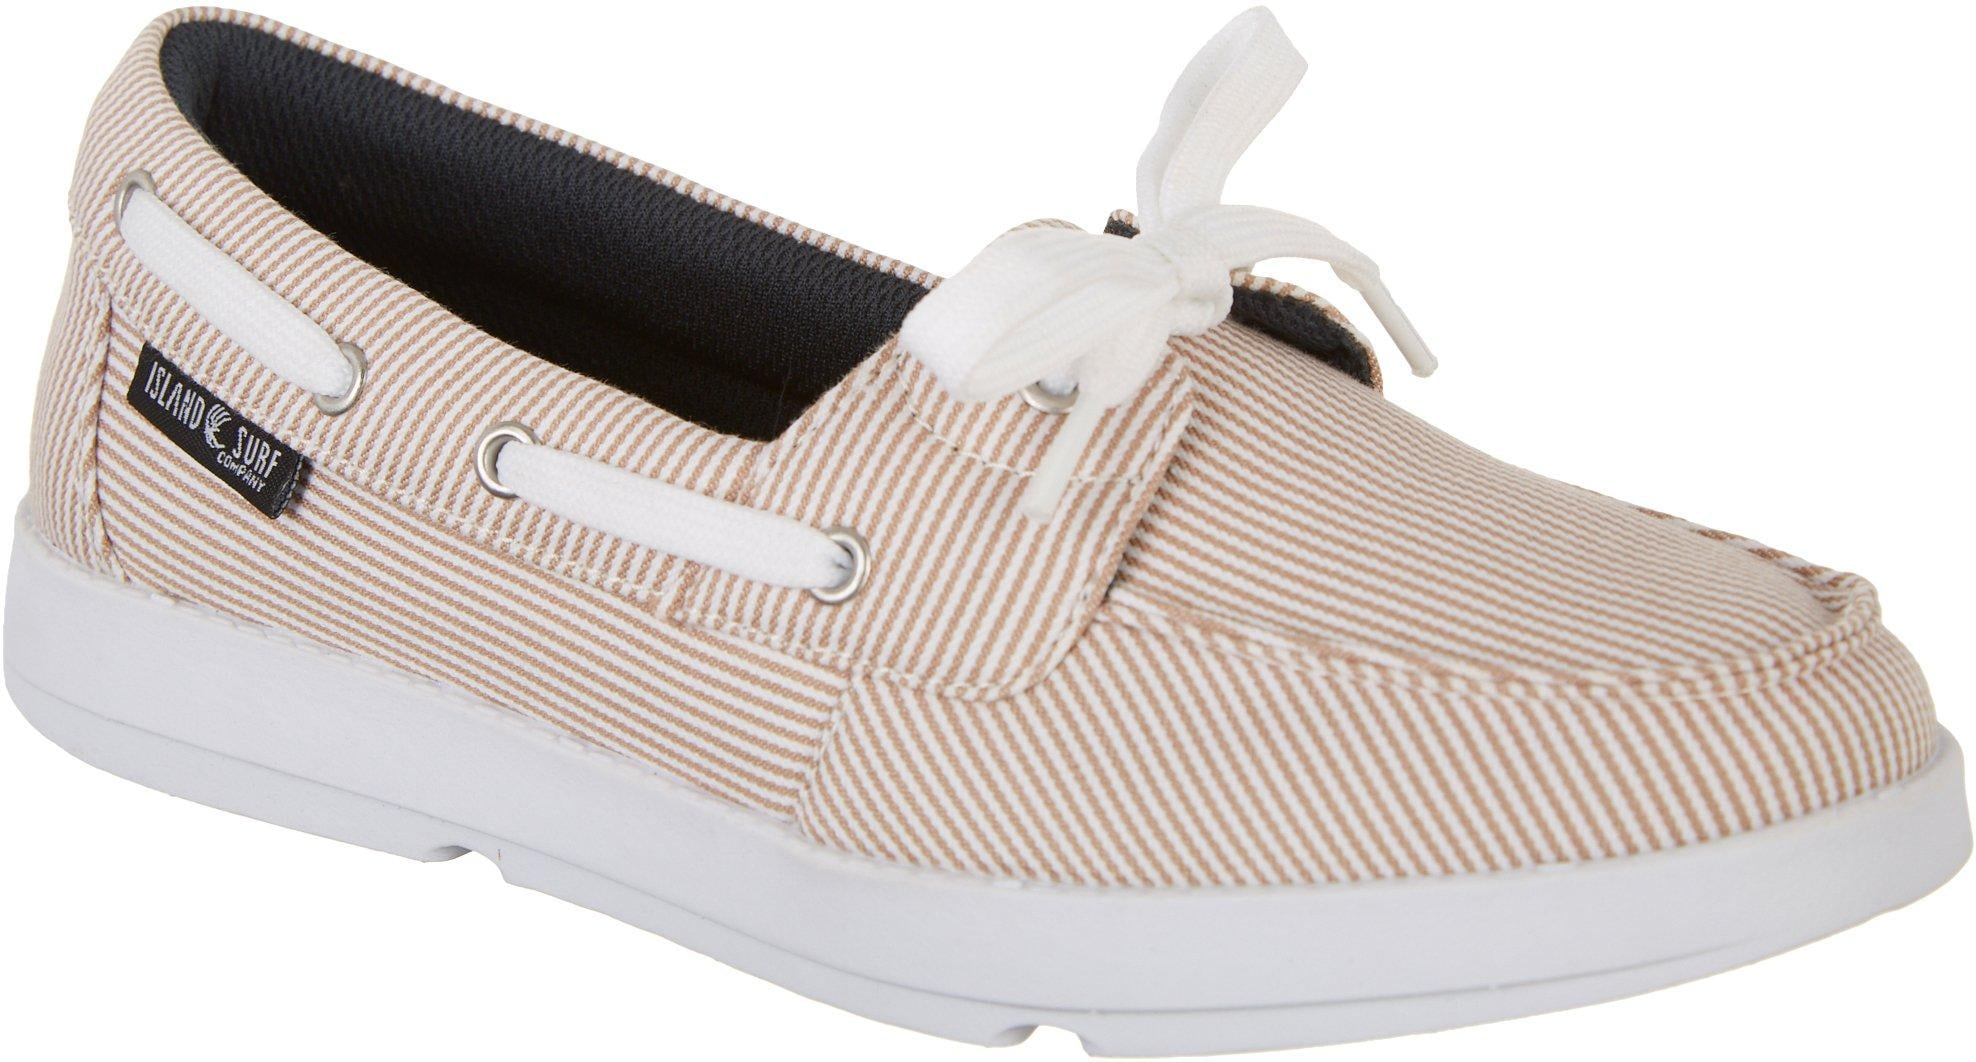 Boulevard Womens Leather Navy White Loafers Boat Shoes Size 3-8